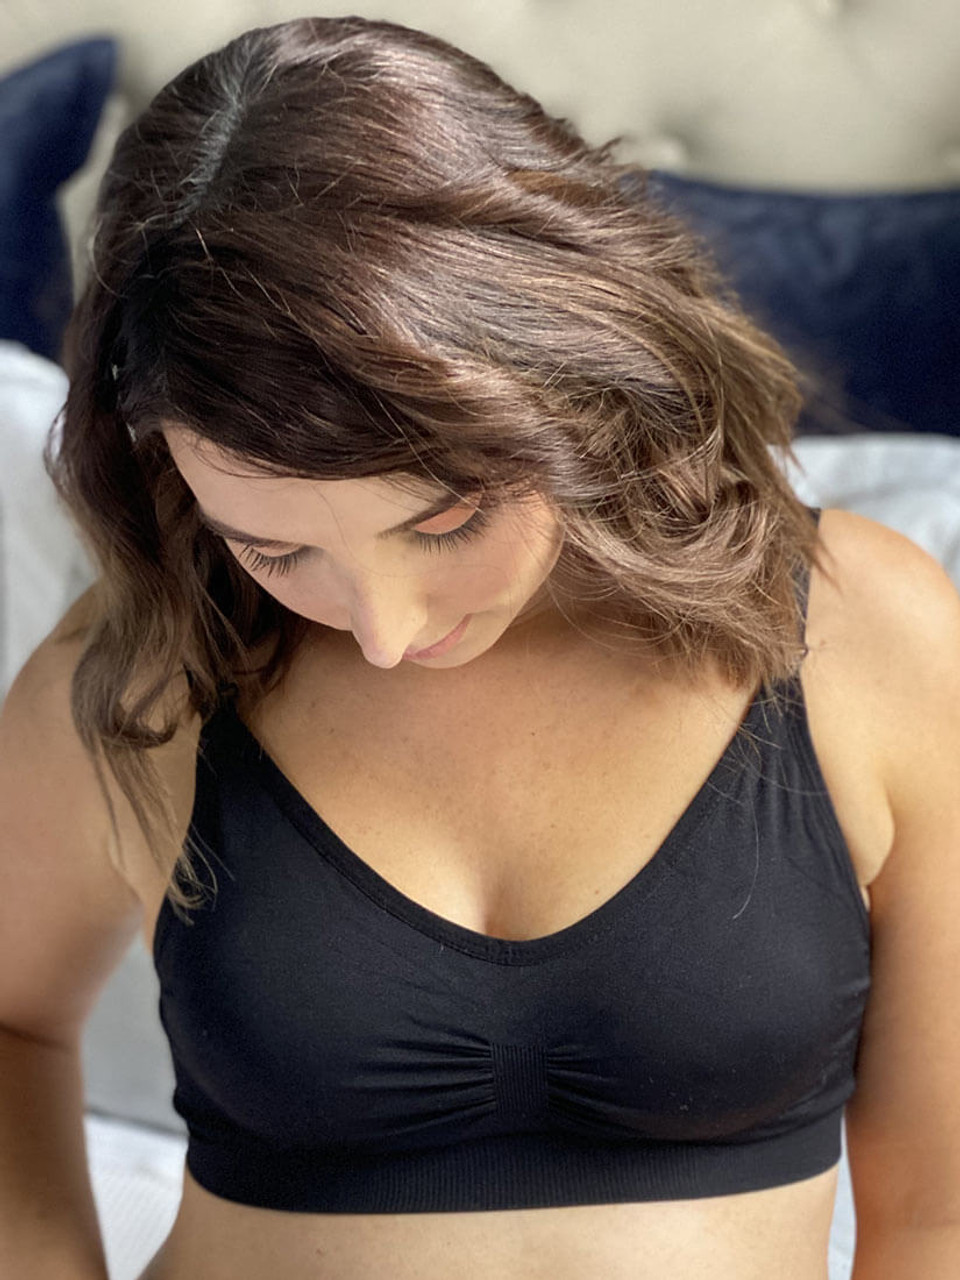 Breastmates Seamless Nursing Bra * The Best & Most Comfy Ever